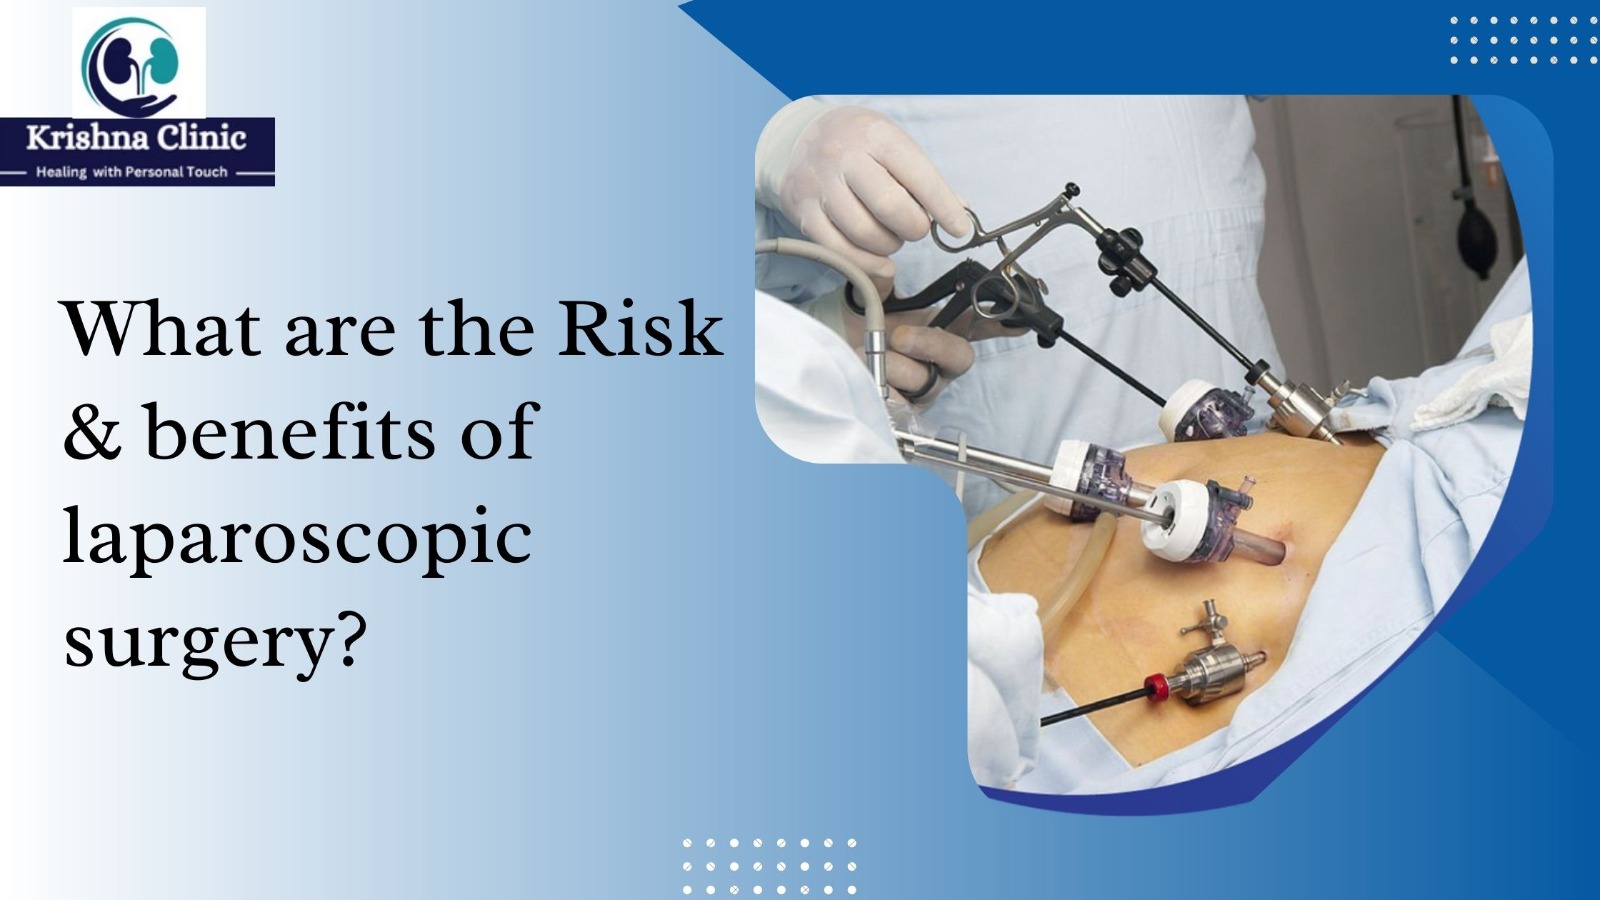 What are the Risk & benefits of laparoscopic surgery?